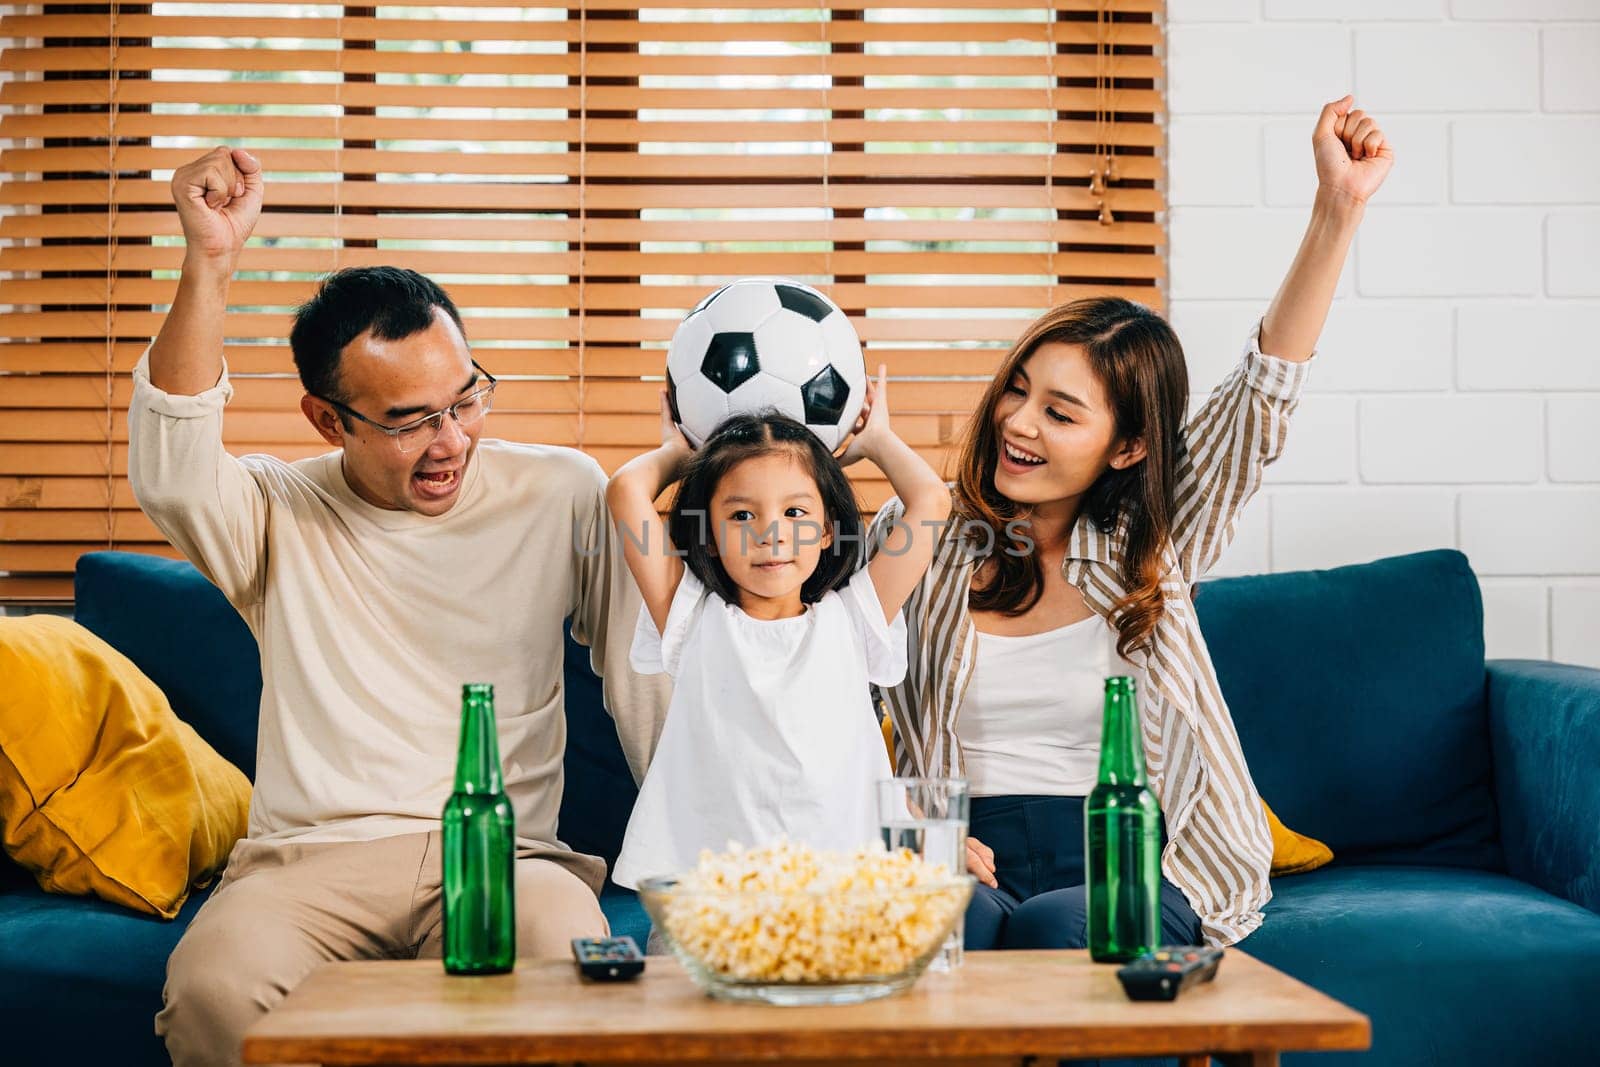 In the warmth of their home, parents and children watch a football match with popcorn and a ball, celebrating a goal. Their togetherness, smiles, and cheers reflect the joy of winning.